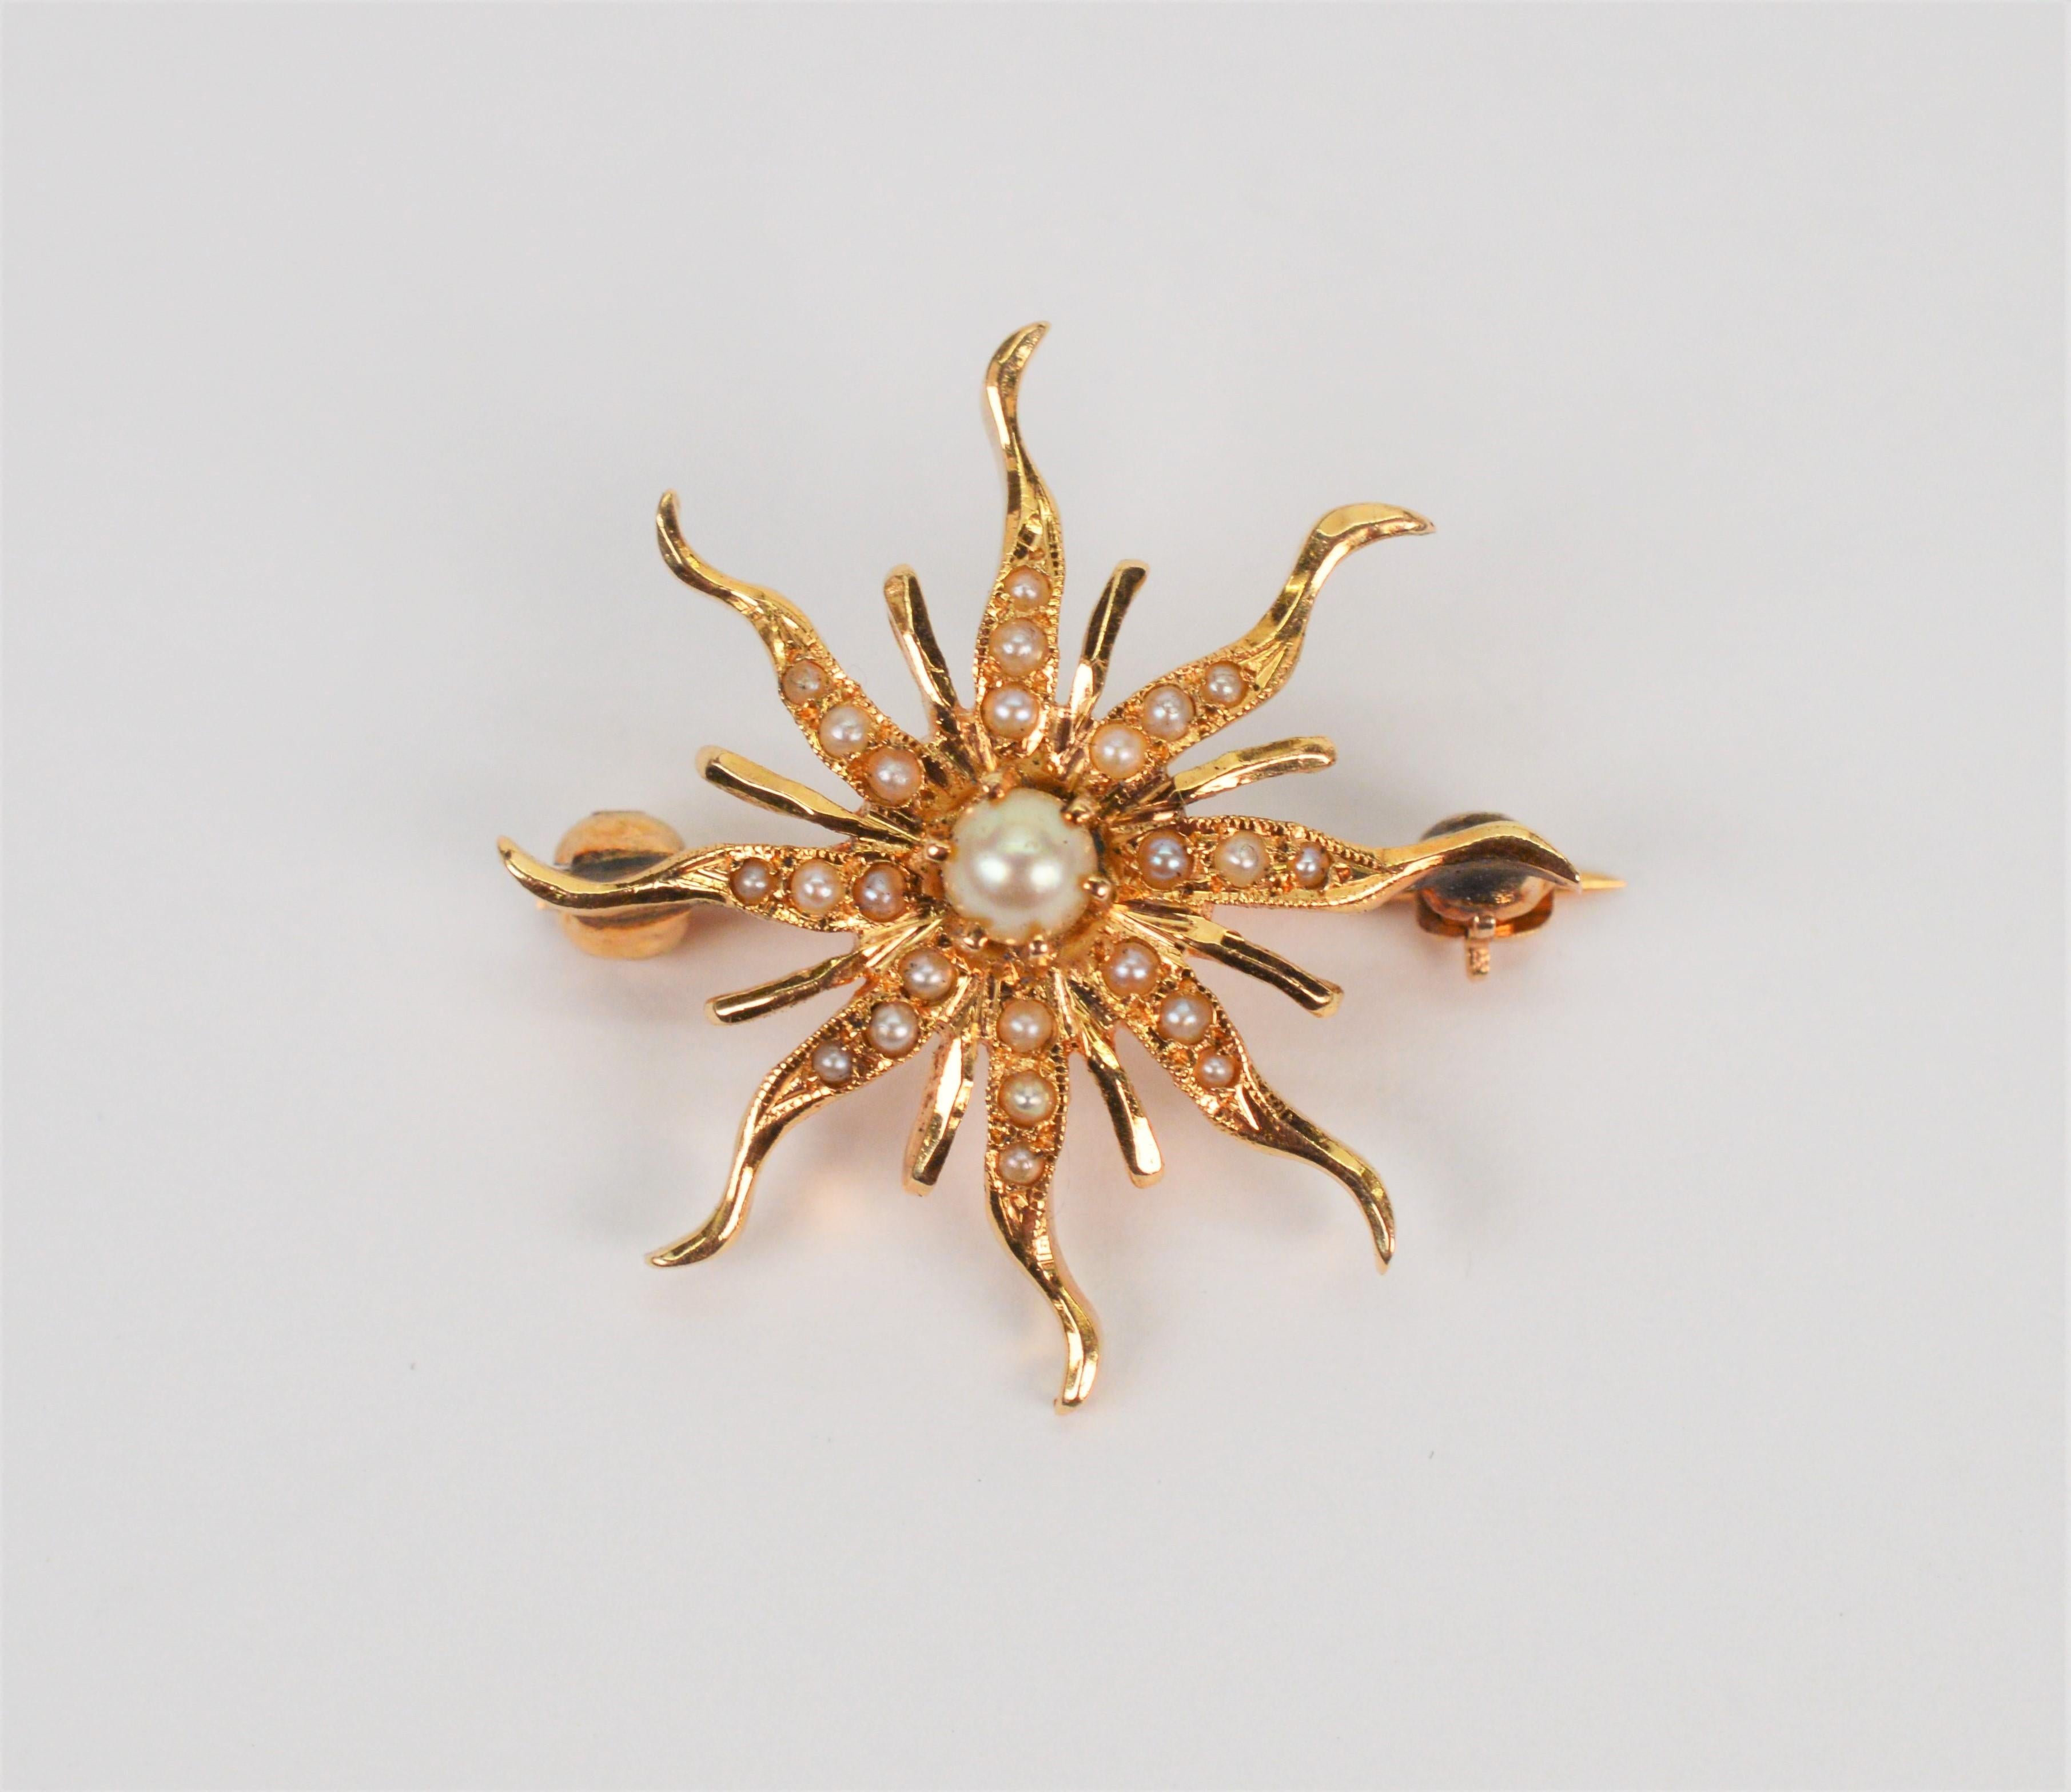 Vintage Solar Brooch Pendant Pin Charm 14K Yellow Gold Necklace w Pearl Accents  In Good Condition For Sale In Mount Kisco, NY